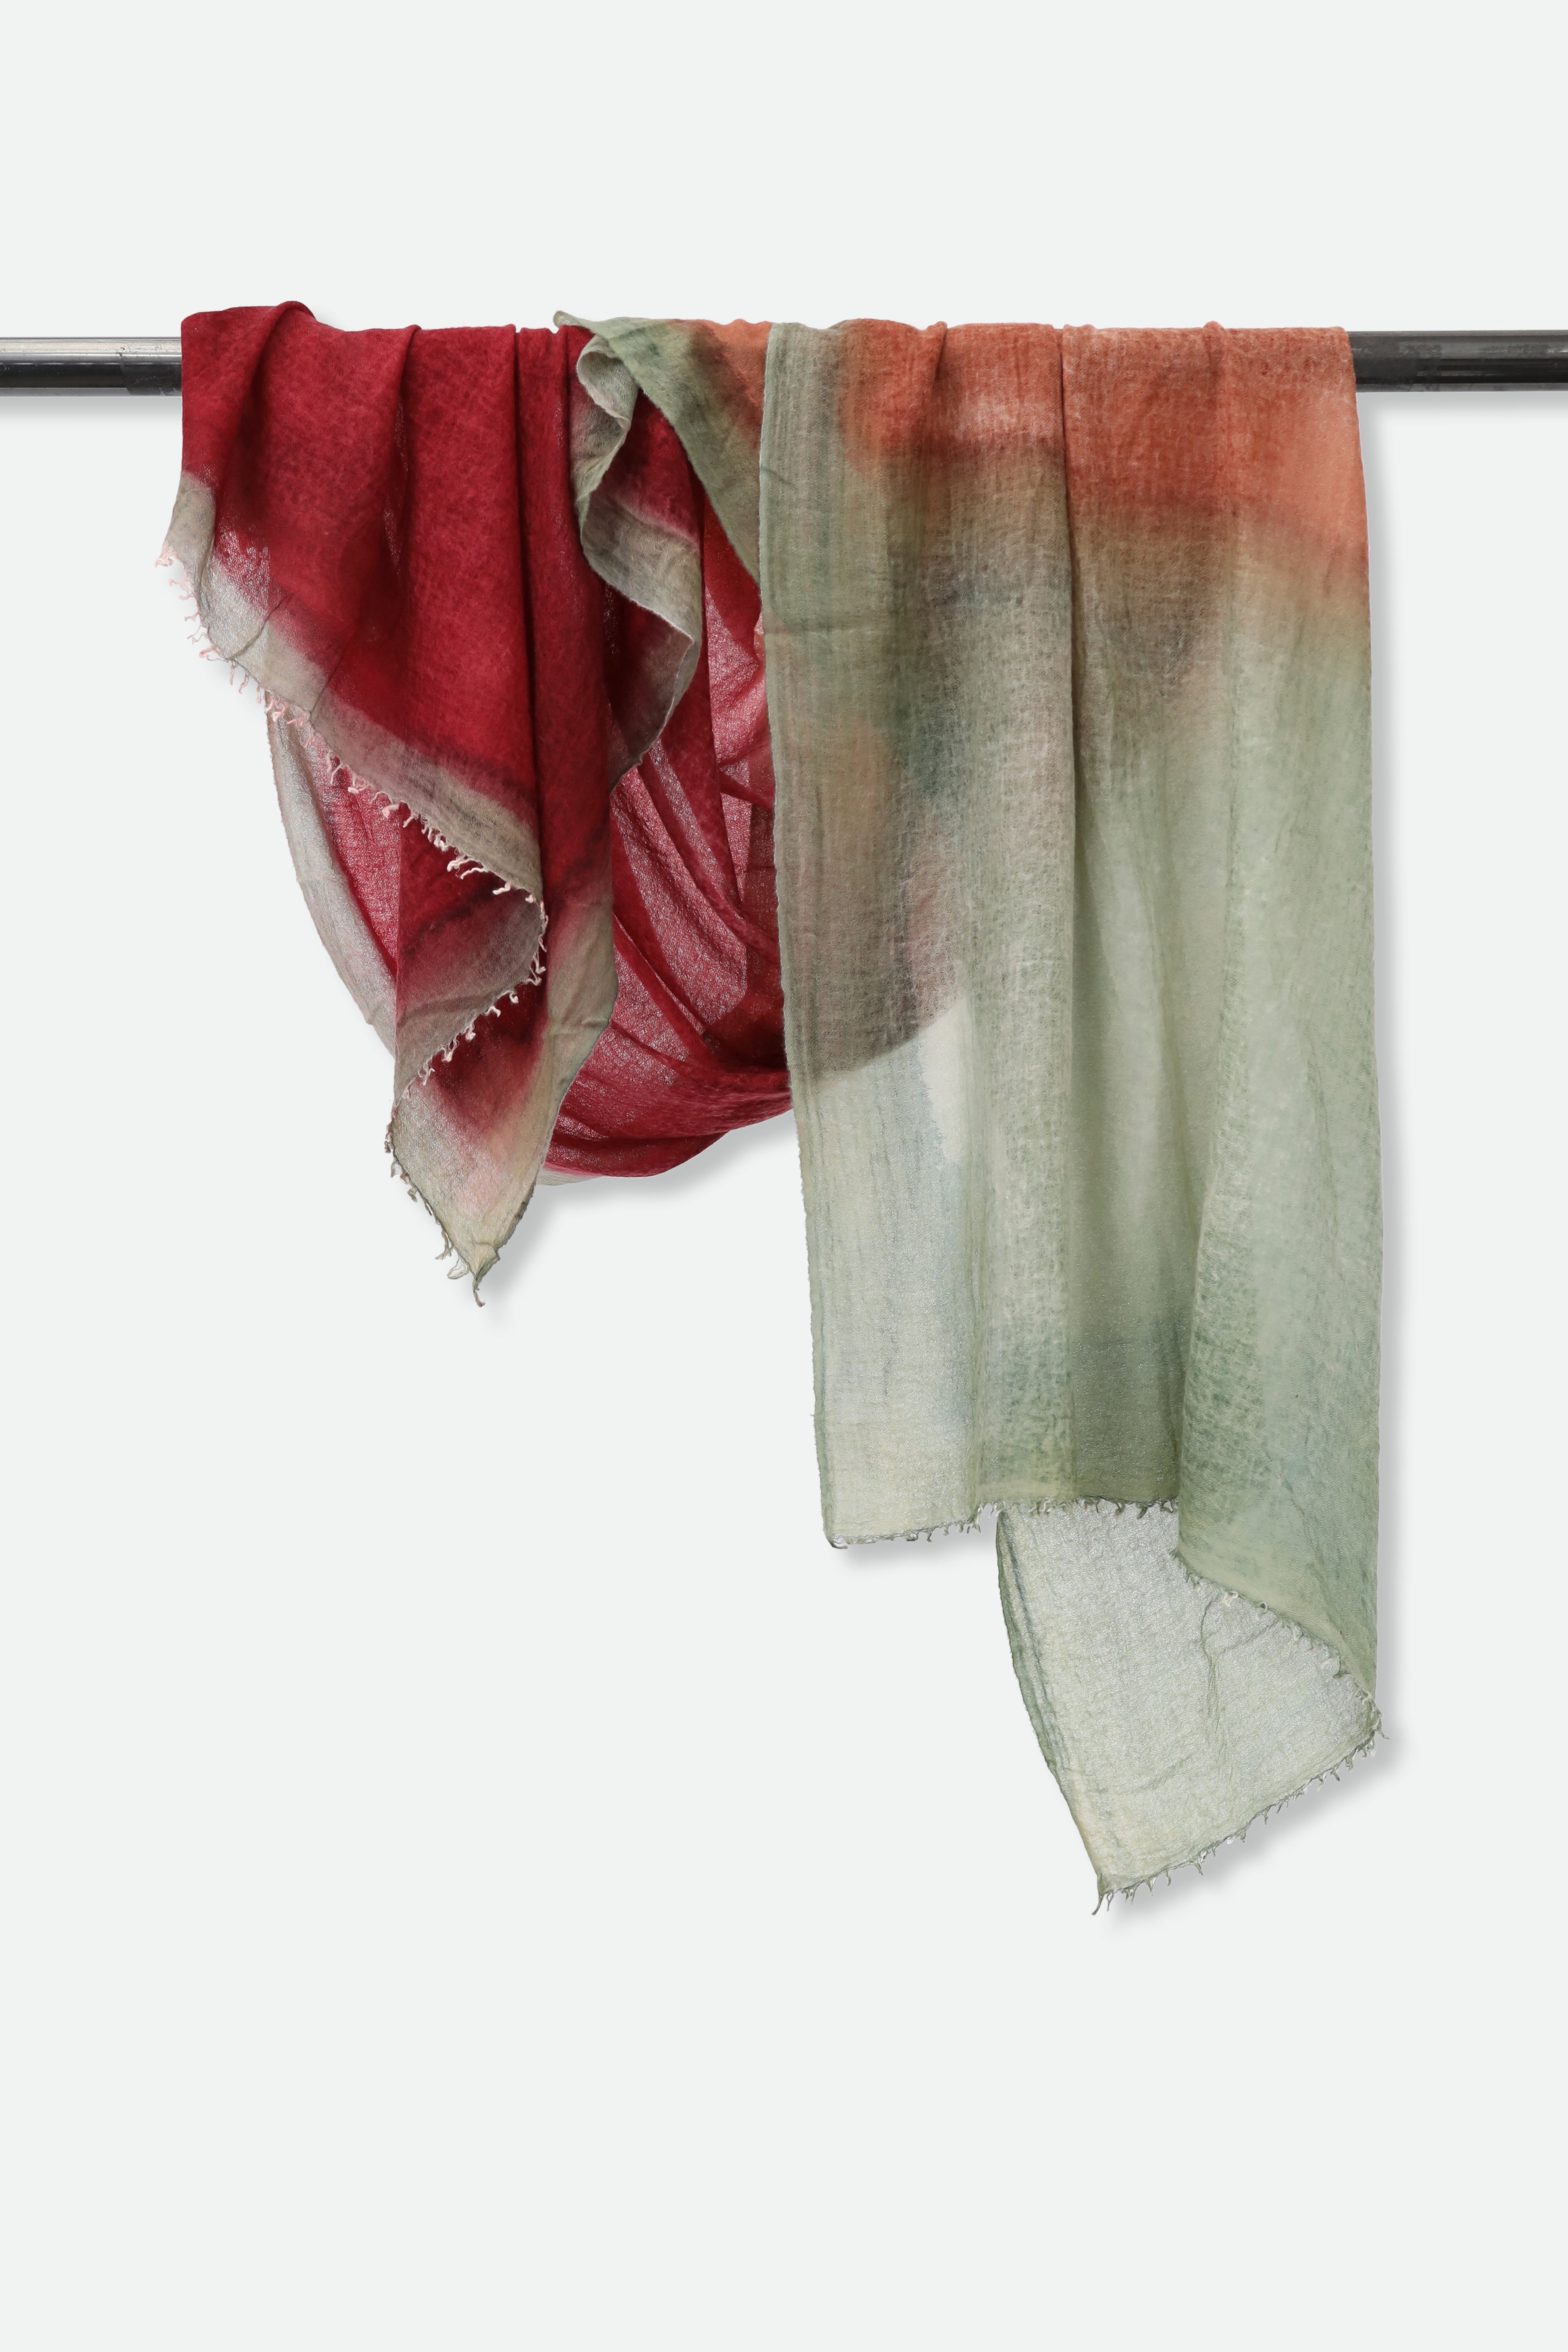 BURANO SCARF IN HAND DYED CASHMERE